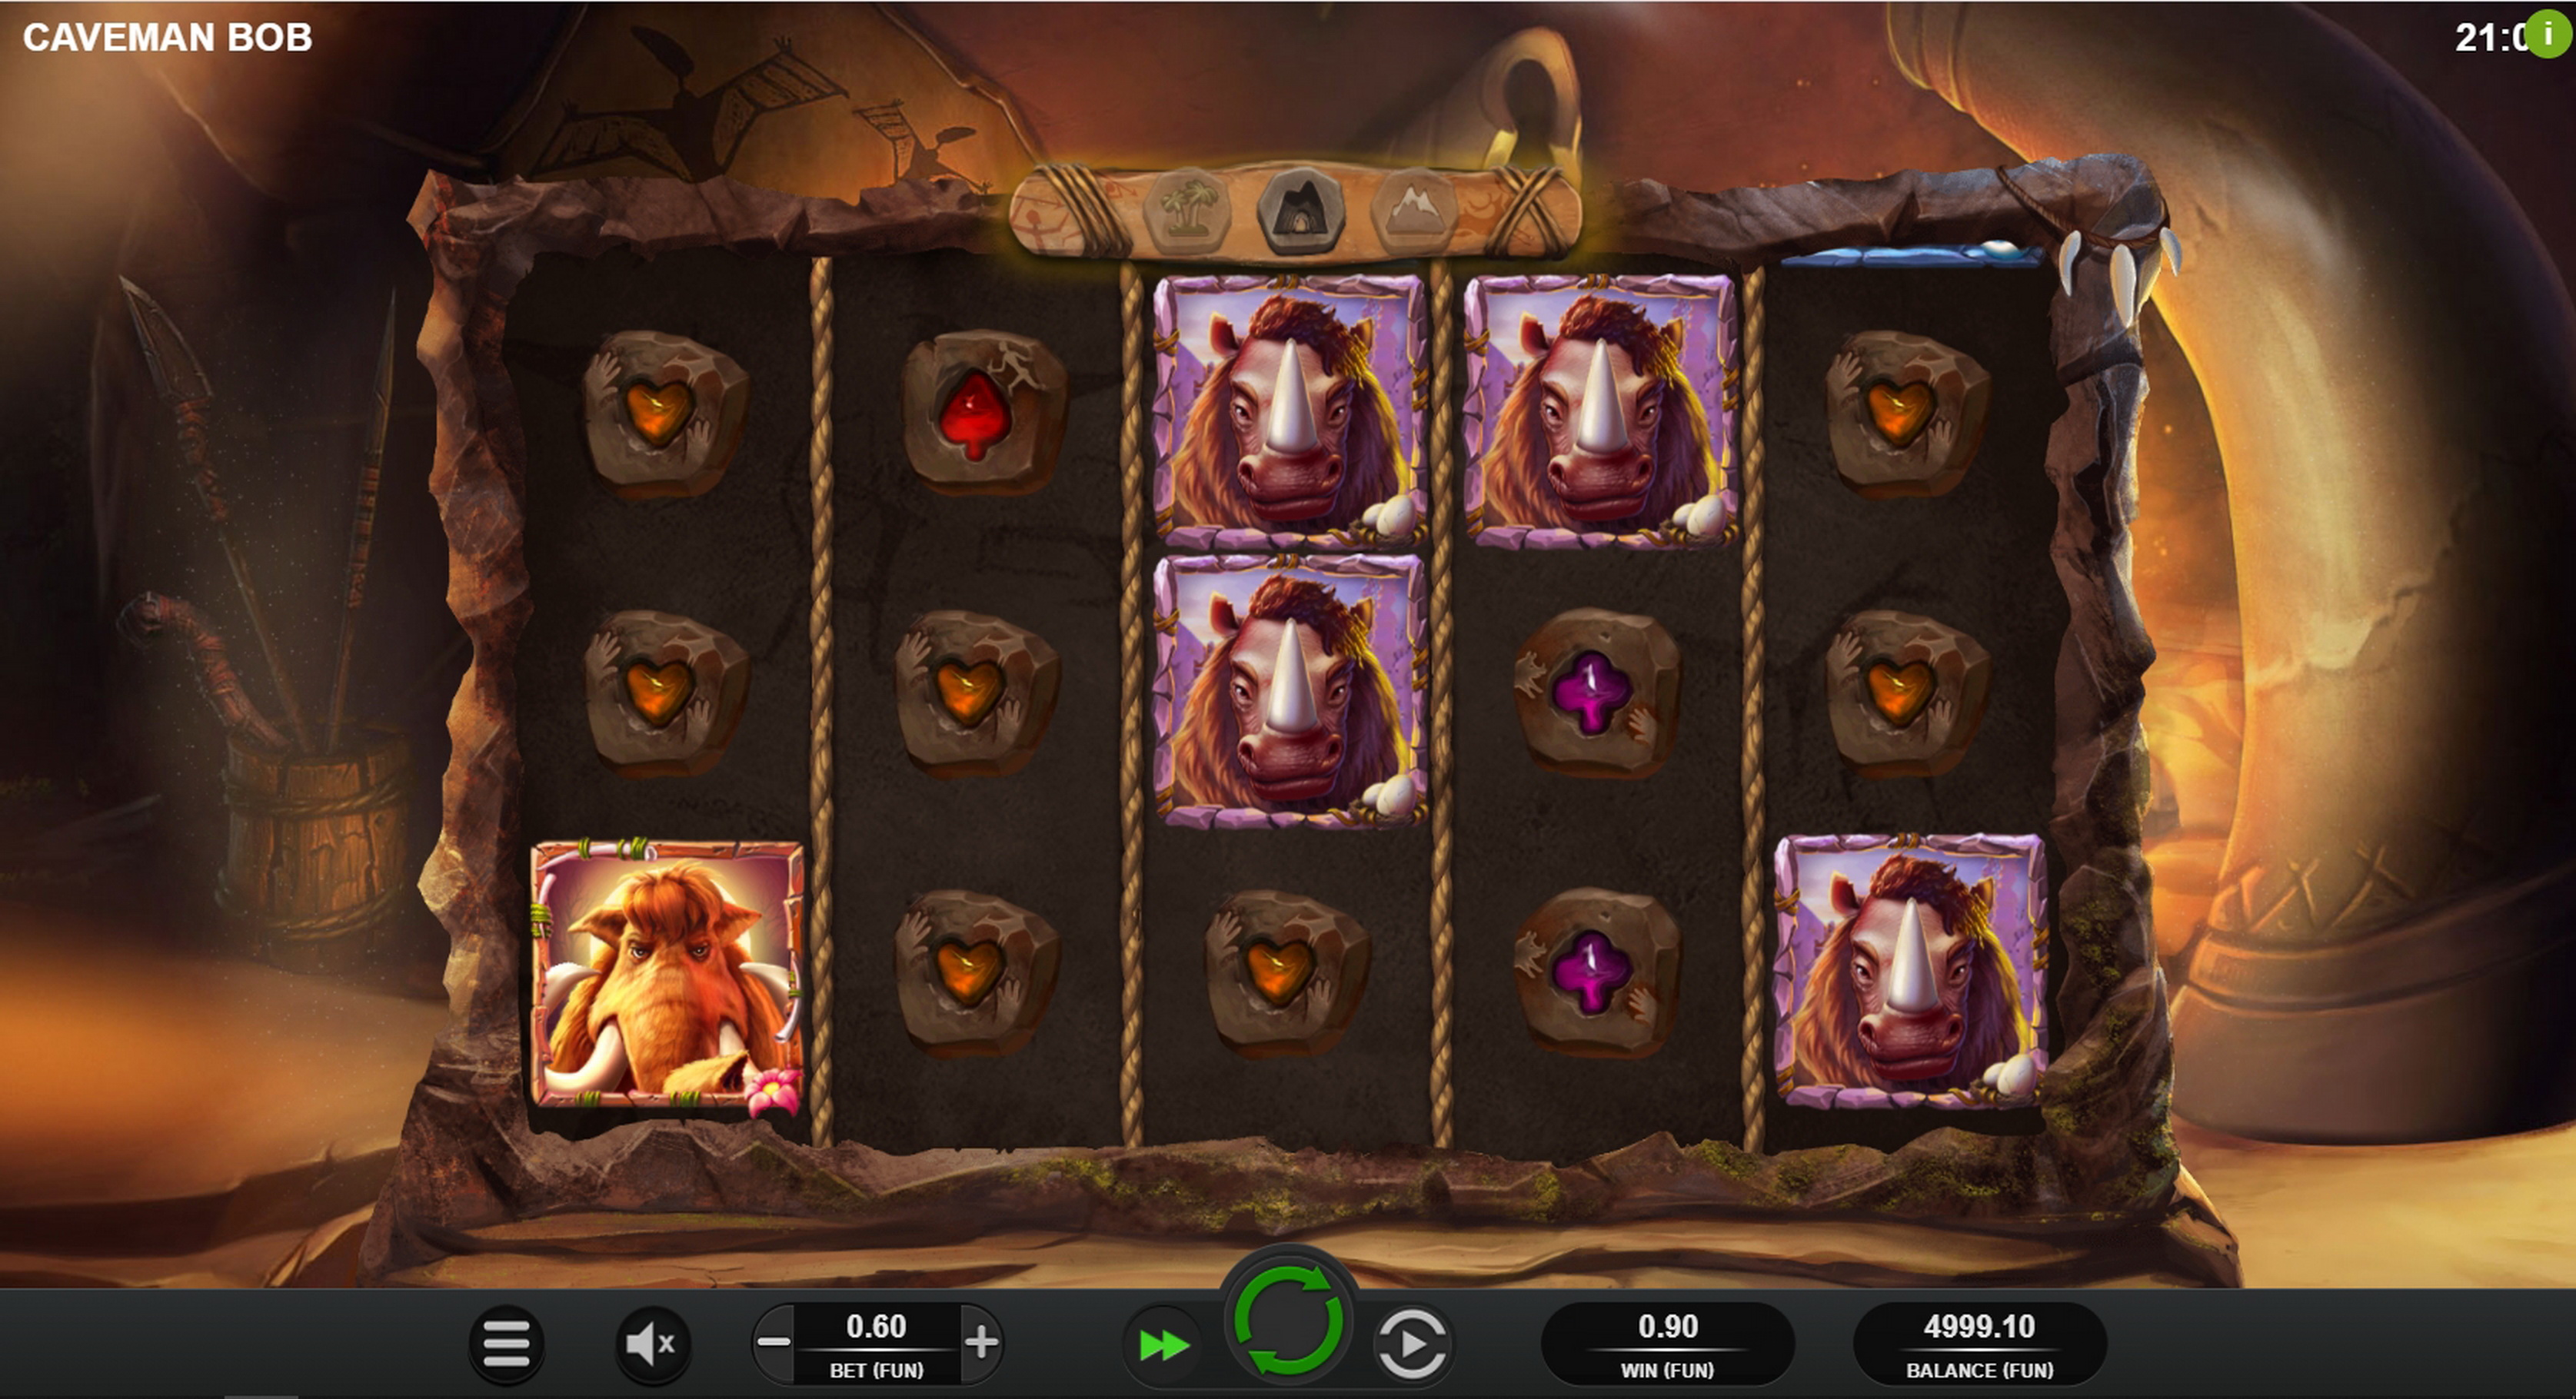 Win Money in Caveman Bob Free Slot Game by Relax Gaming